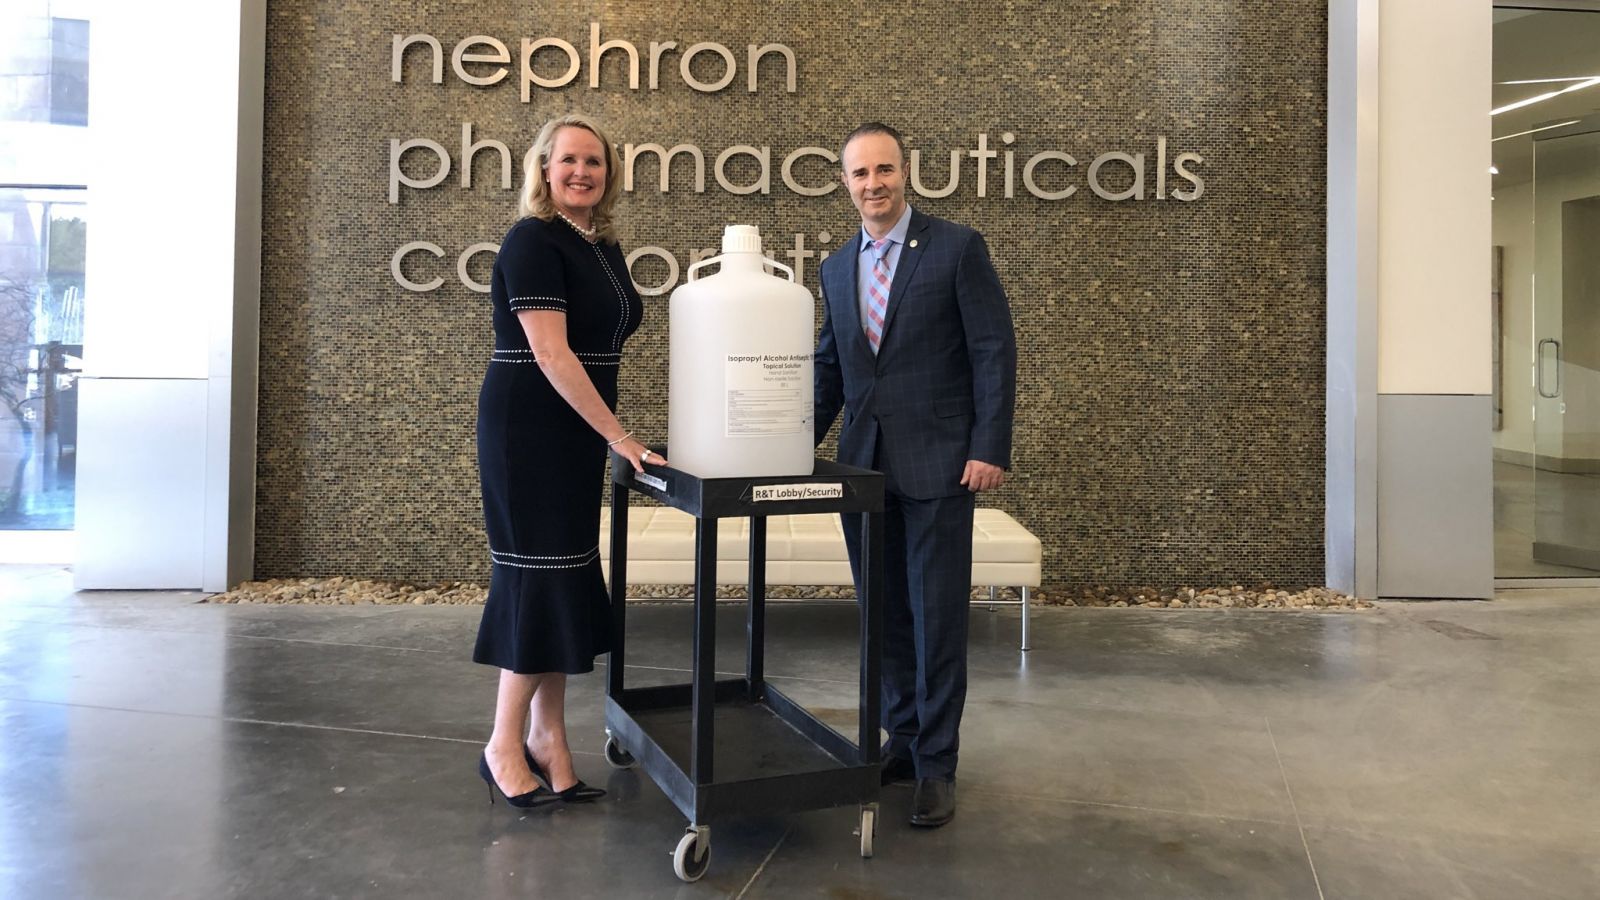 Nephron president and CEO Lou Kennedy (left) donated 50 liters of hand sanitizer made at the West Columbia respiratory medication manufacturer to the William Jennings Bryan Dorn Veterans Affairs Medical Center. (Photo/Provided)